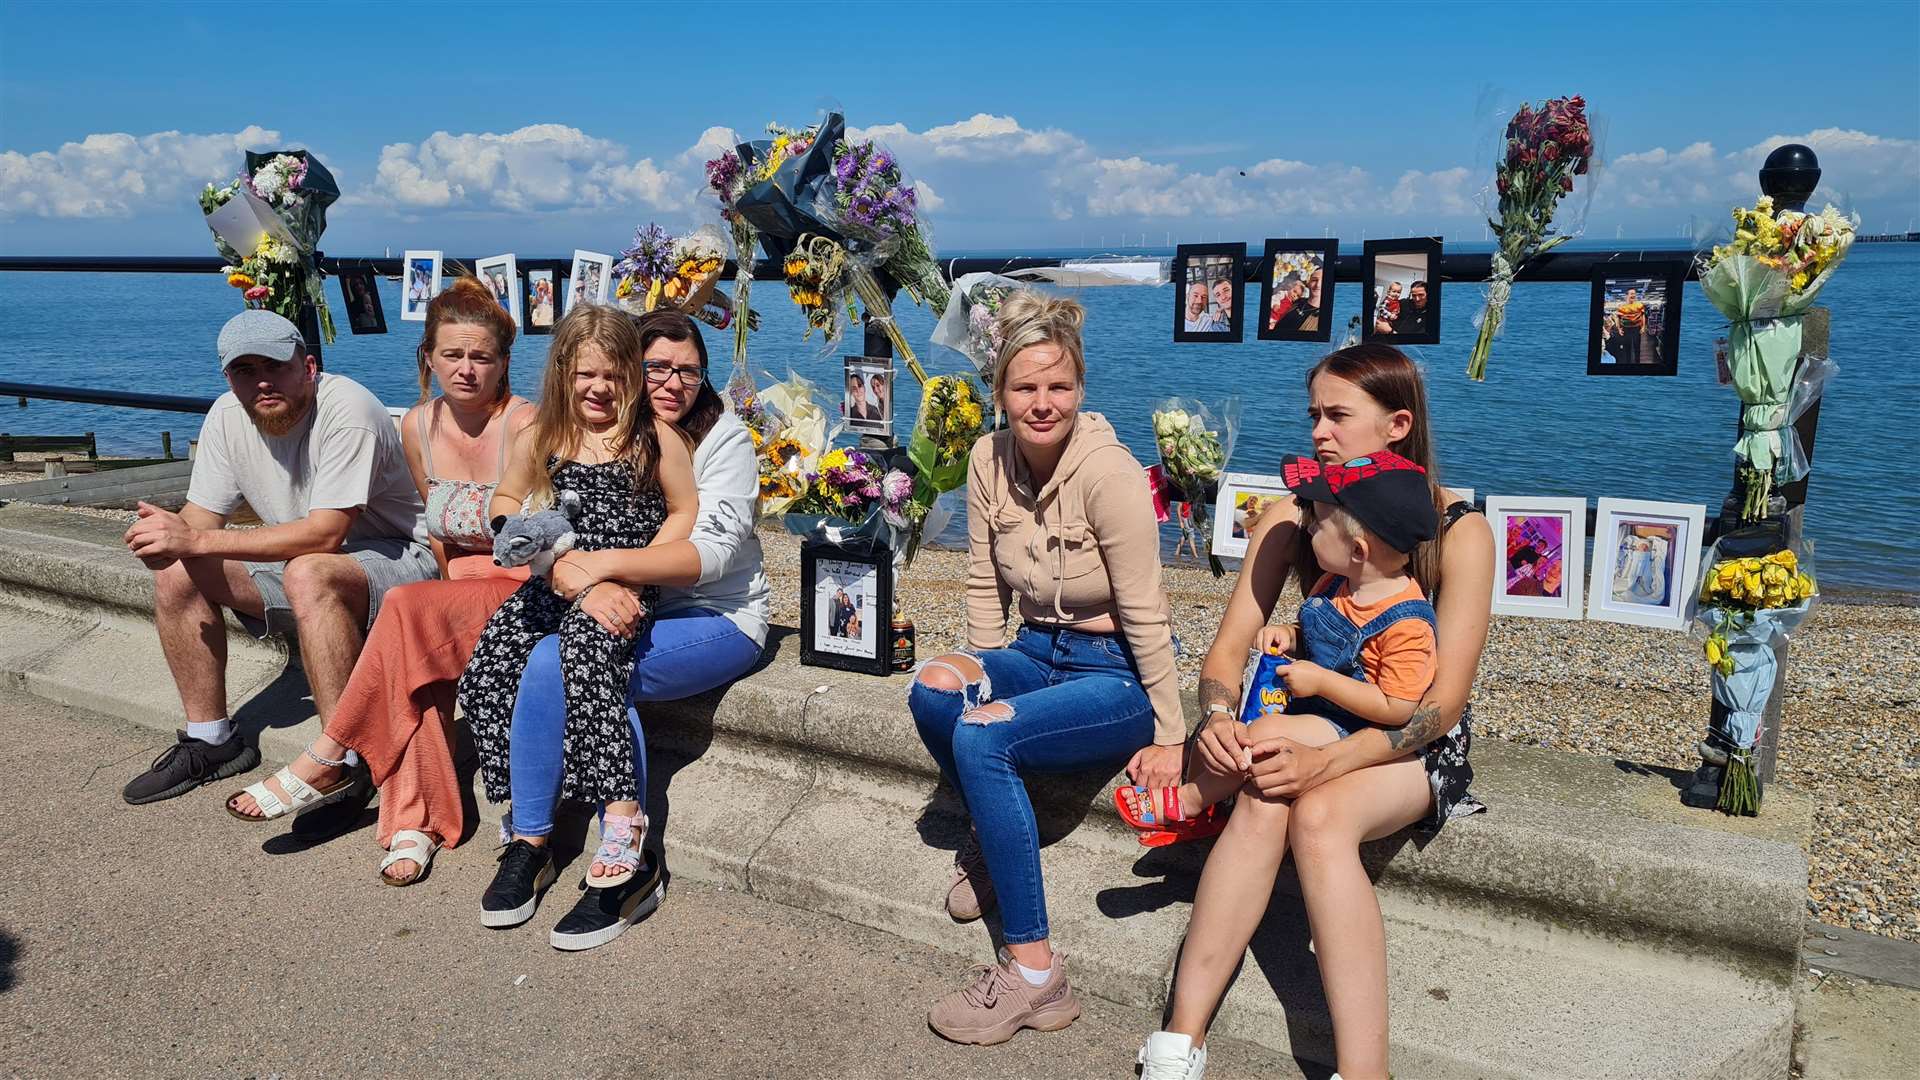 Some of Toby Barrowcliff’s loved ones at the scene of his death in Herne Bay, where flowers have been laid by wellwishers